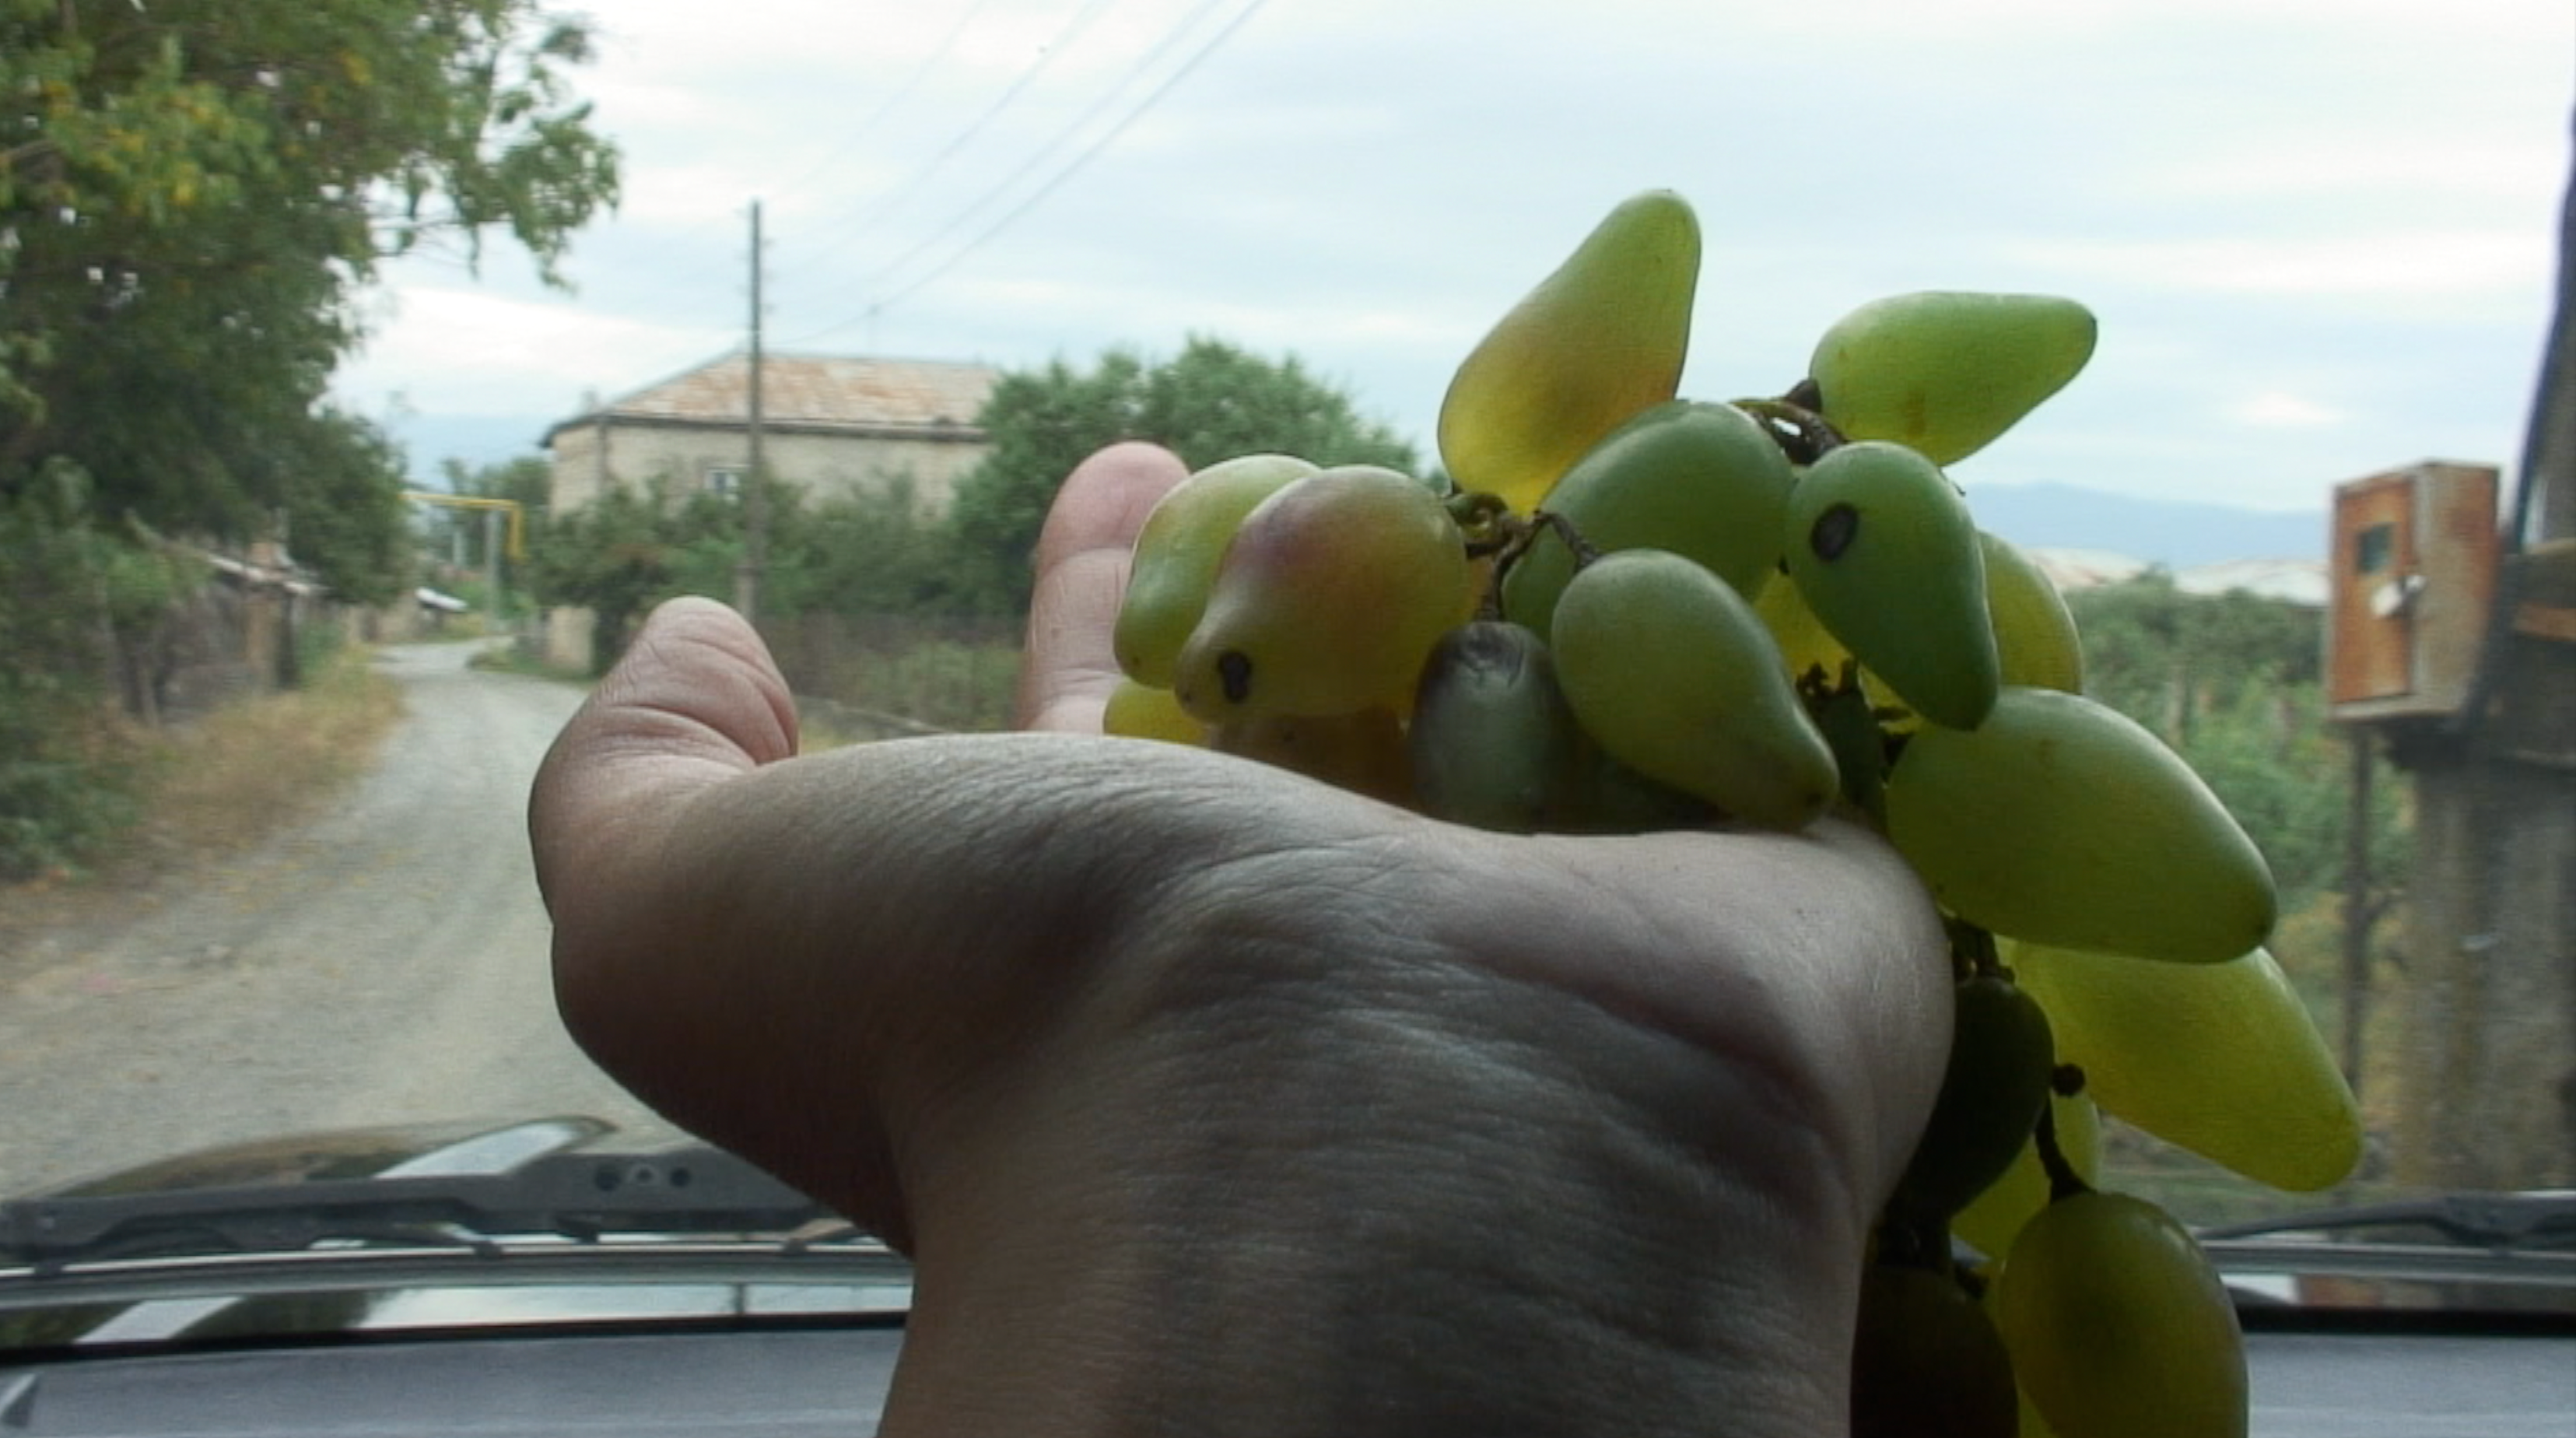 A close-up of a hand outstretched across a car dashboard, its palm open and holding a bunch of grapes. In the background, a dirt road in the countryside is blurred out of focus.